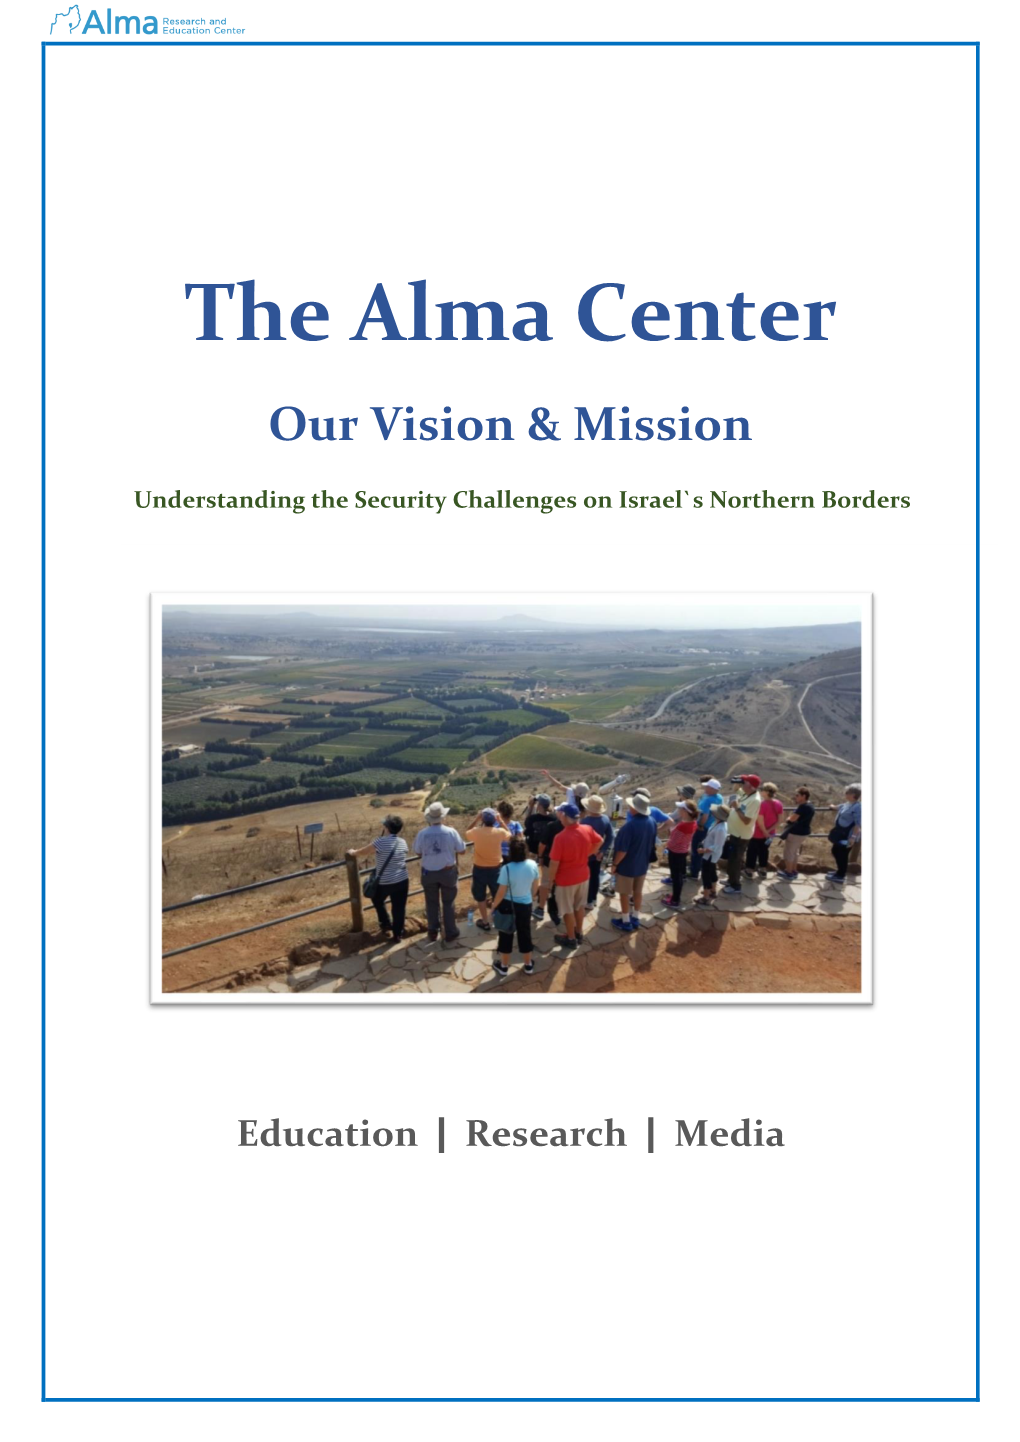 The Alma Center Our Vision & Mission